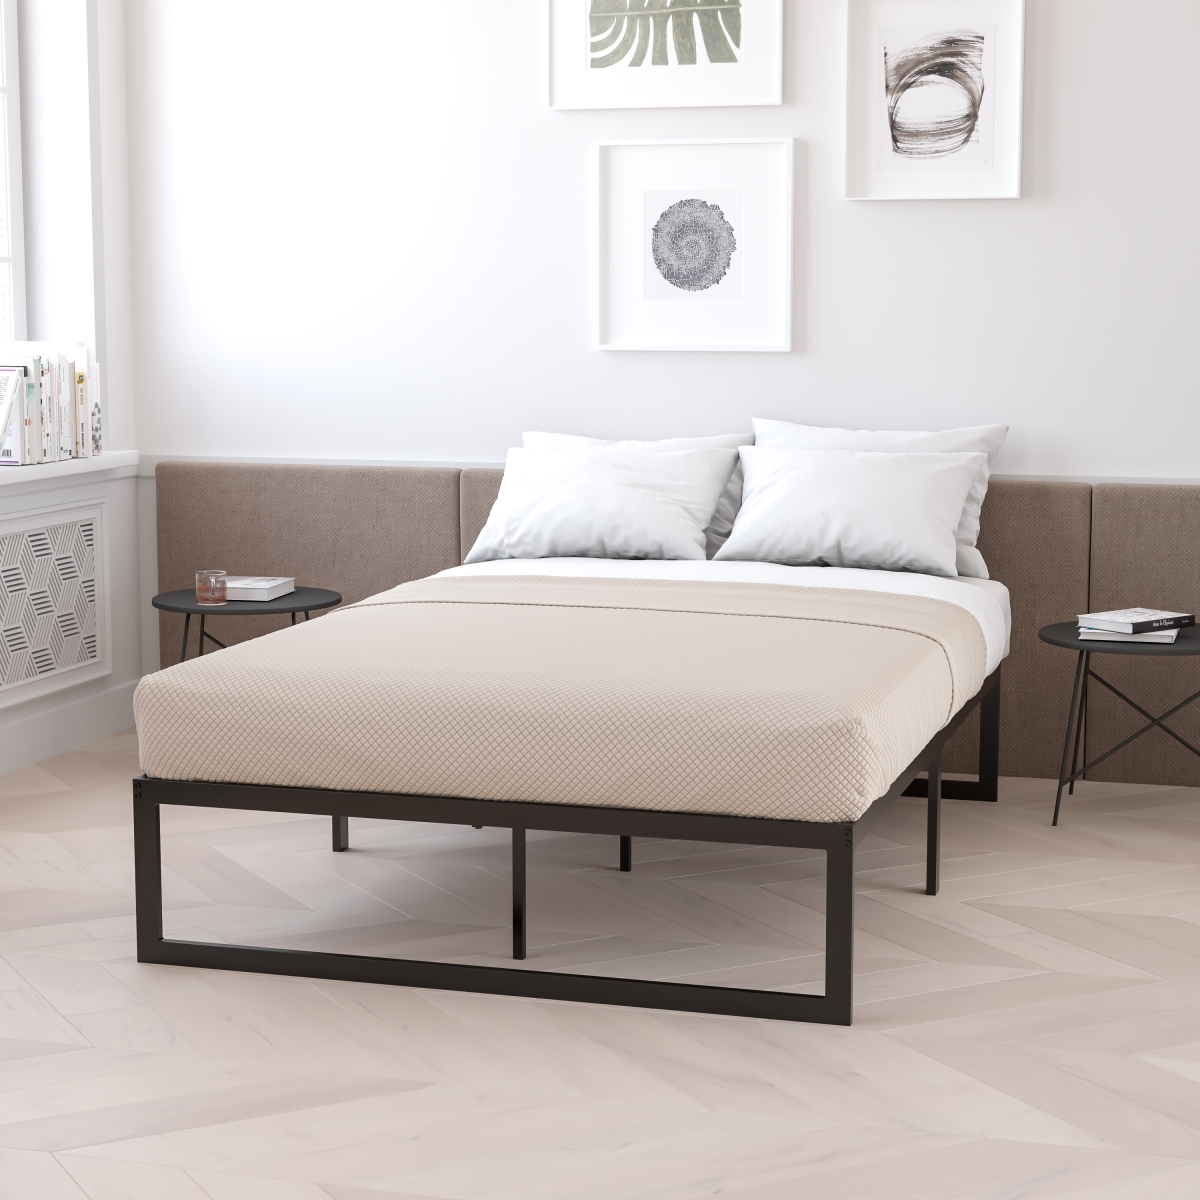 Picture of Flash Furniture XU-BD10001-12MFM-F-GG 14 in. Metal Platform Bed Frame with 12 in. Memory Foam Pocket Spring Mattress in a Box - Full Size